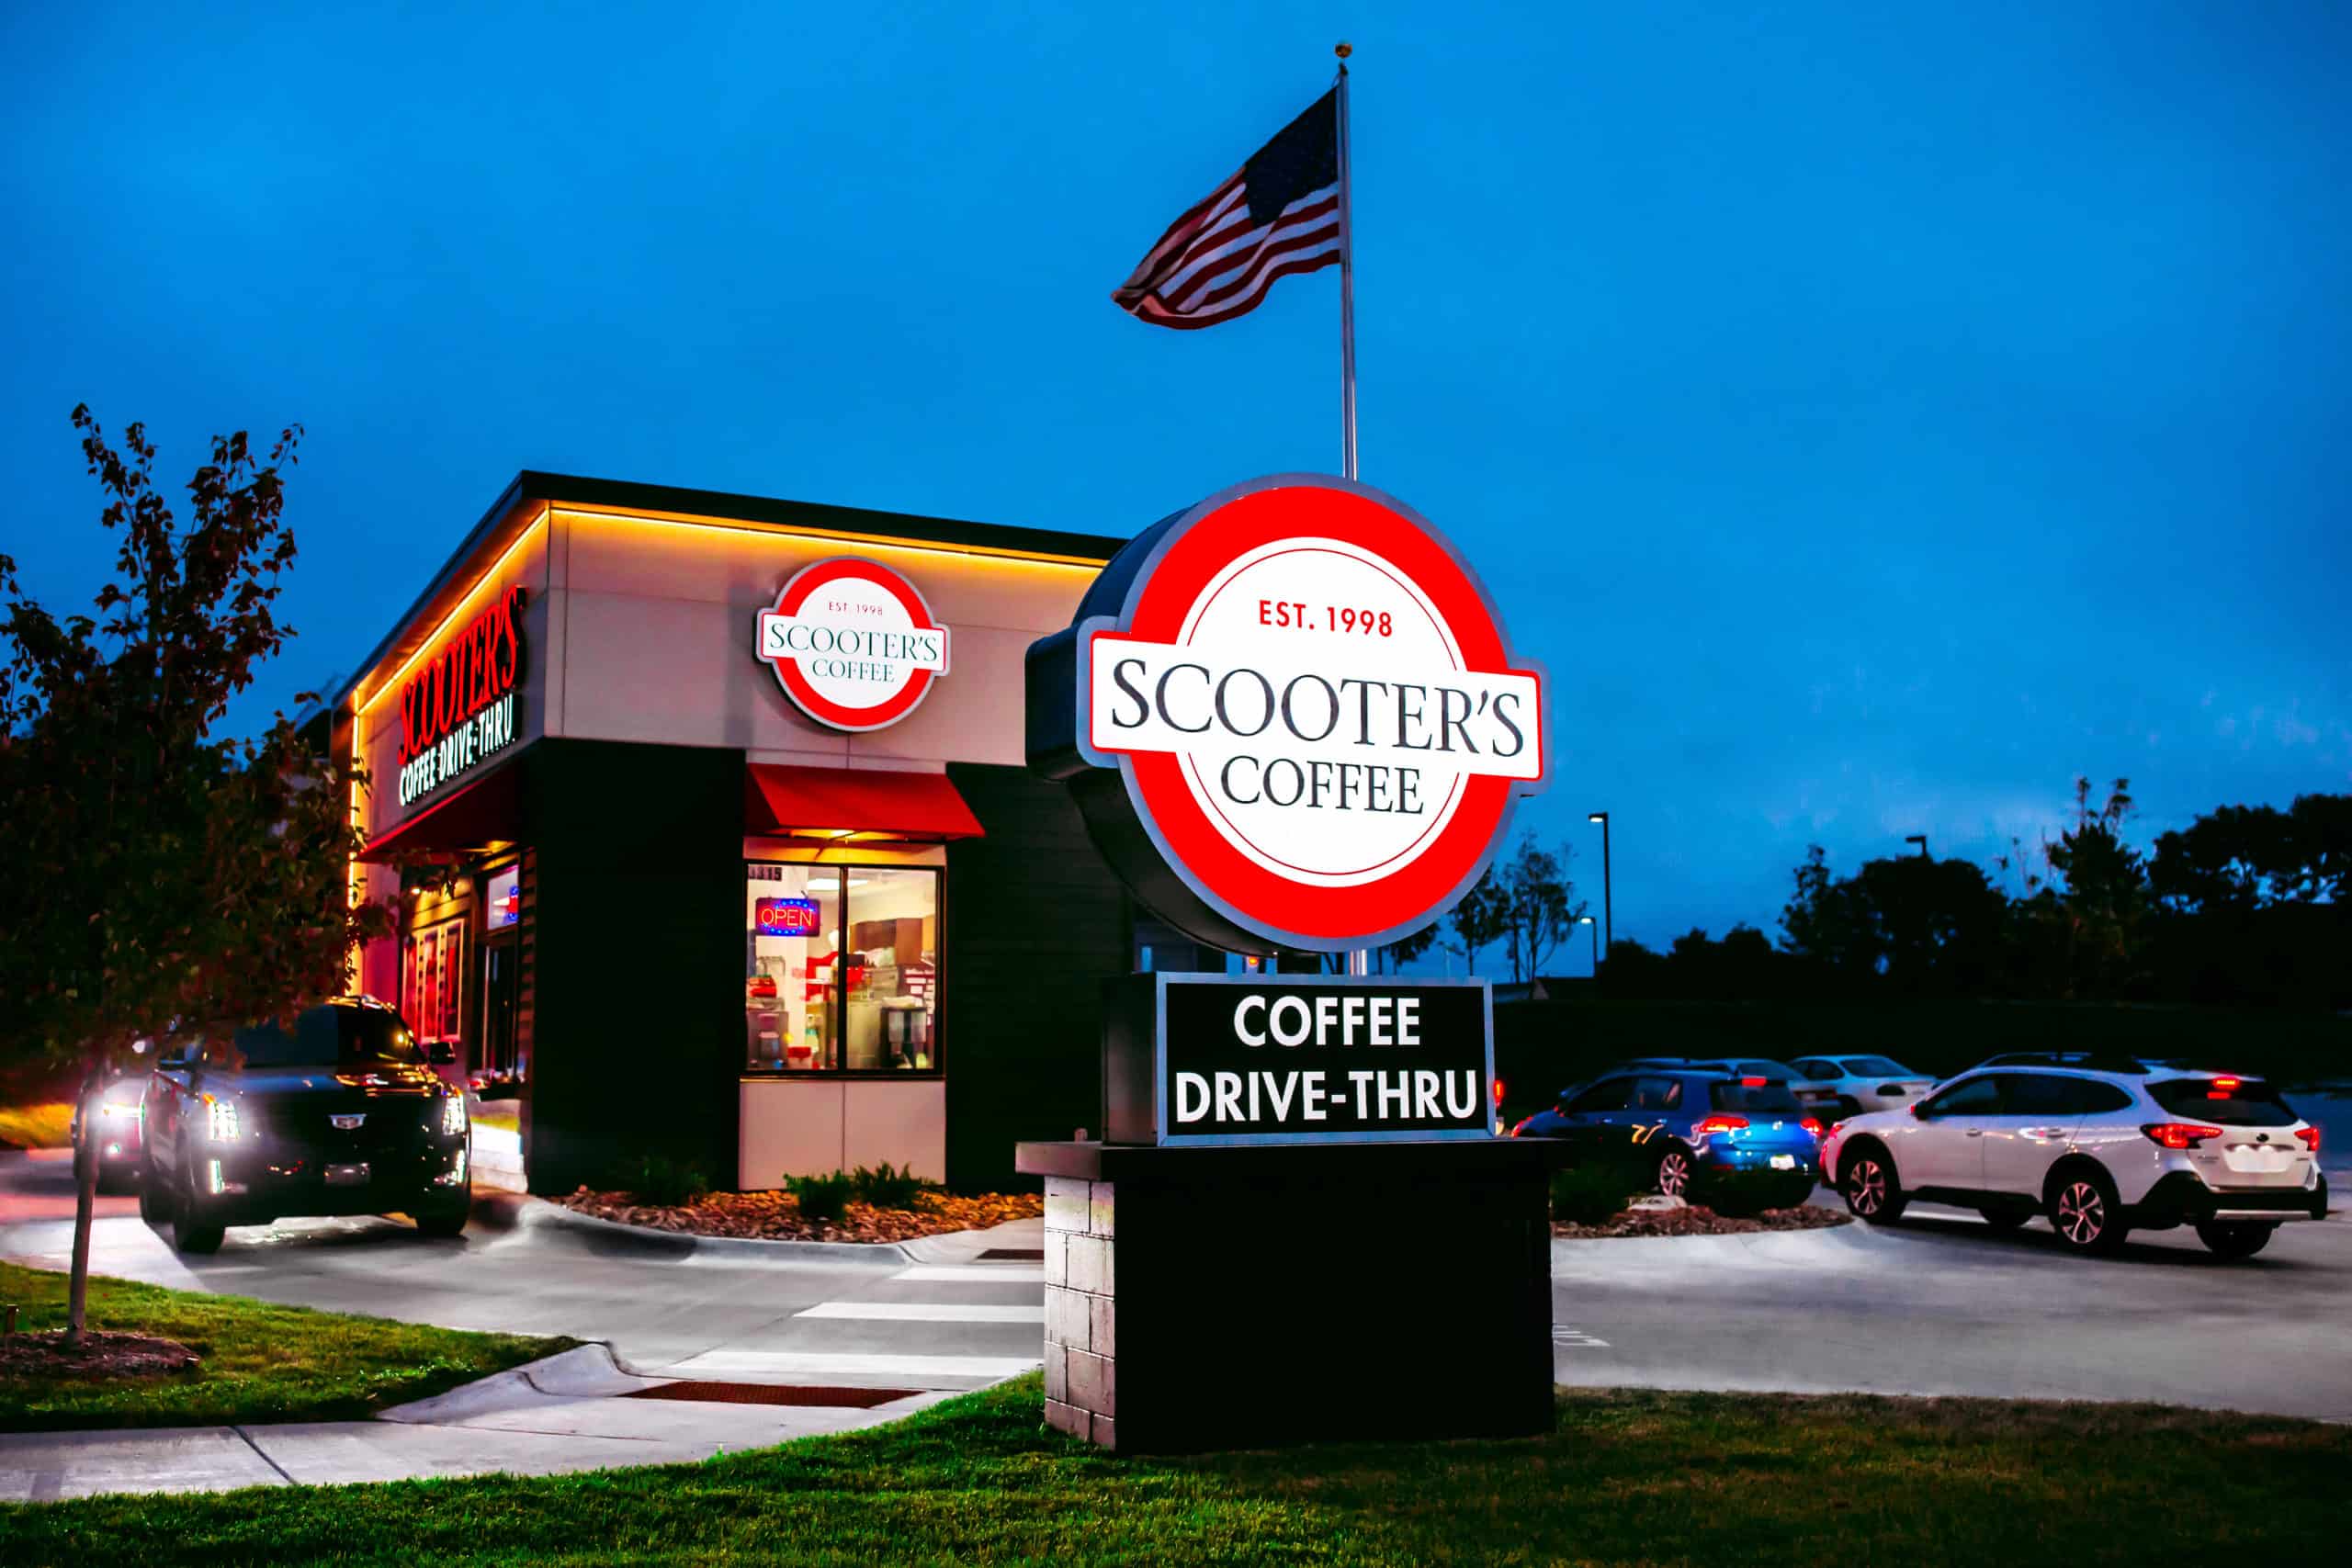 A Scooter's Coffee drive-thru coffee kiosk with an American flag.